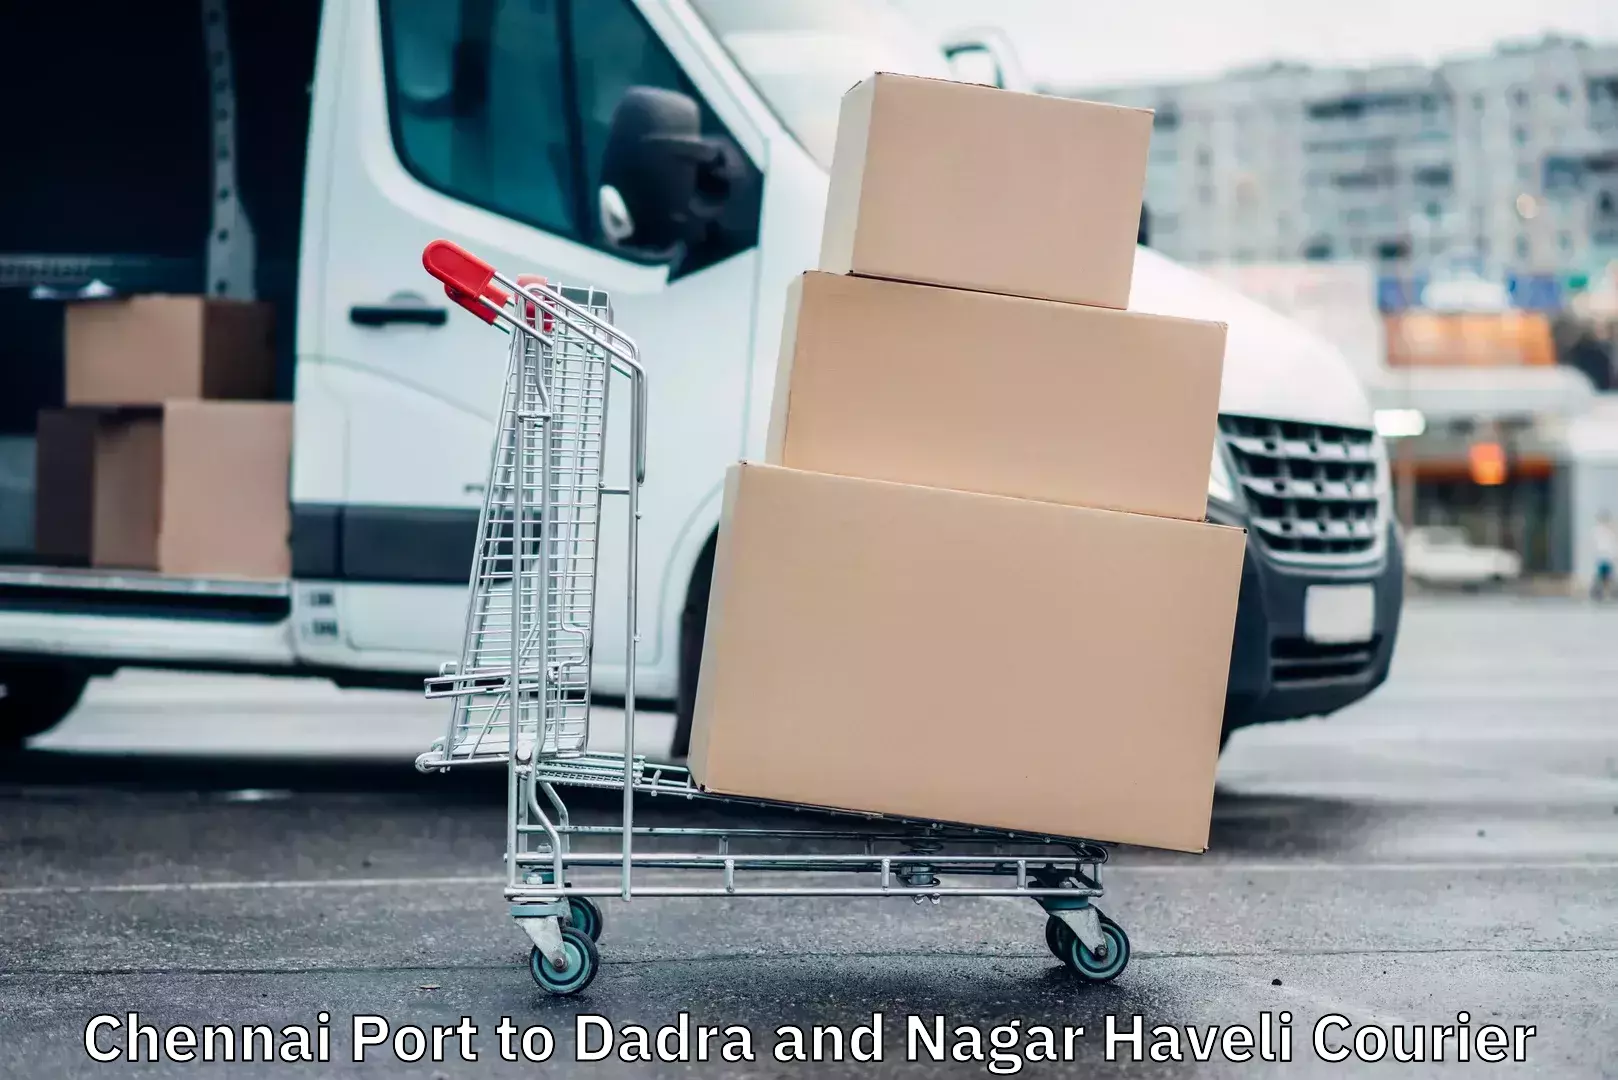 Local delivery service Chennai Port to Dadra and Nagar Haveli